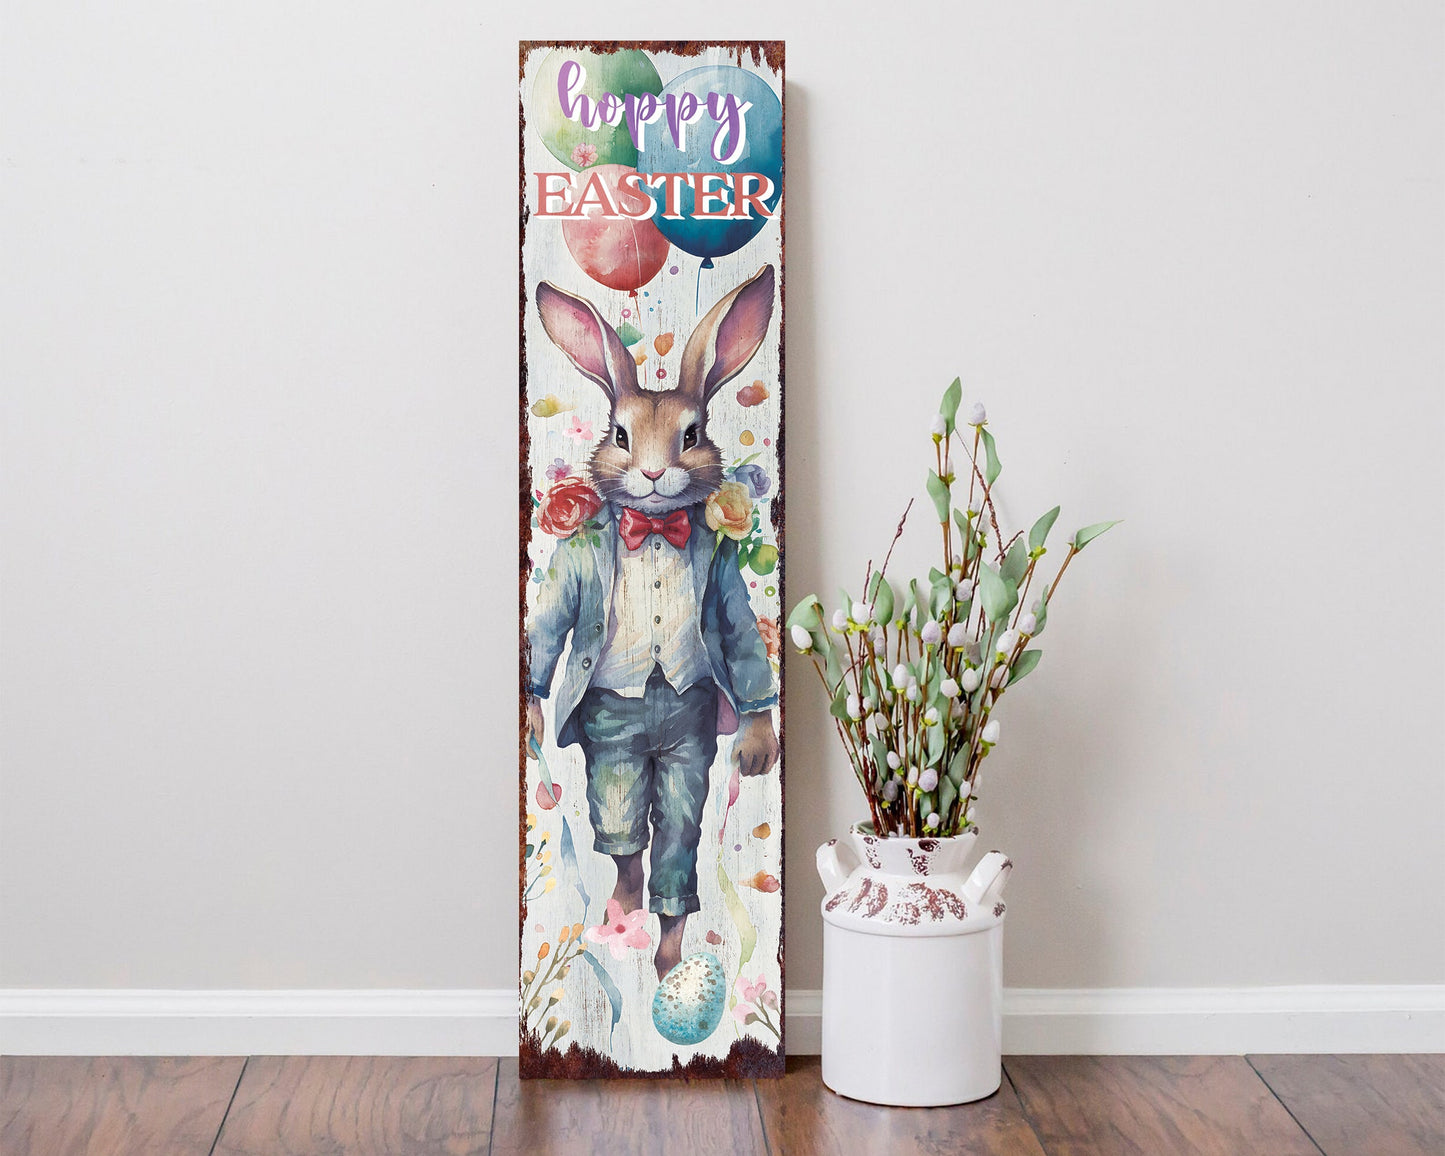 36in Rustic Modern Farmhouse 'Hoppy Easter' Sign for Front Porch | Easter Outdoor Decor for Front Door